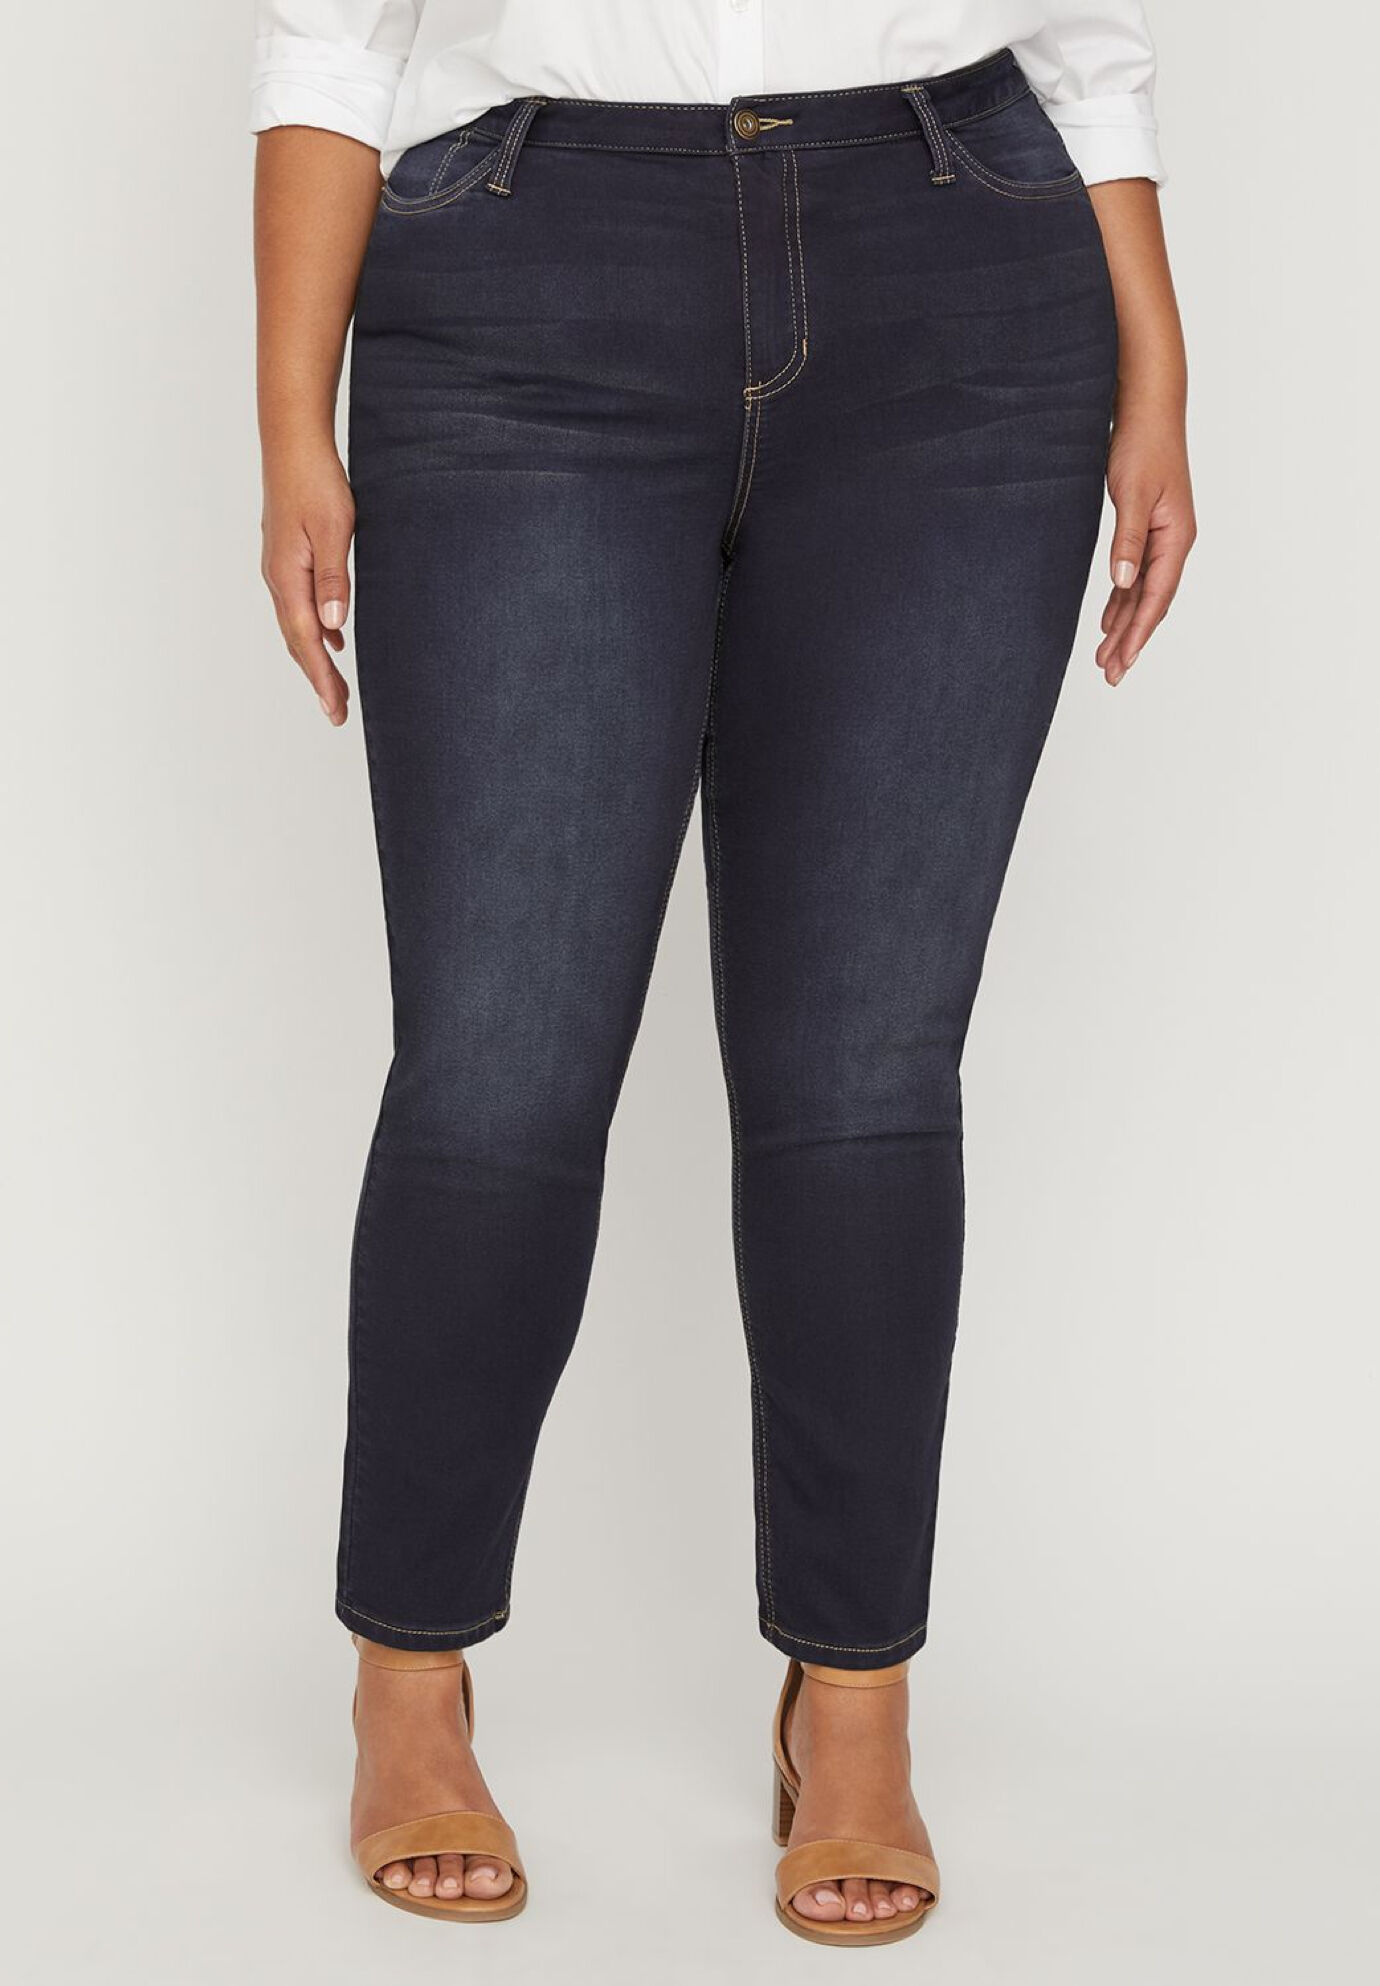 Skinny Women Black Denim Jeans, Button And Zipper, High Rise at Rs  290/piece in New Delhi